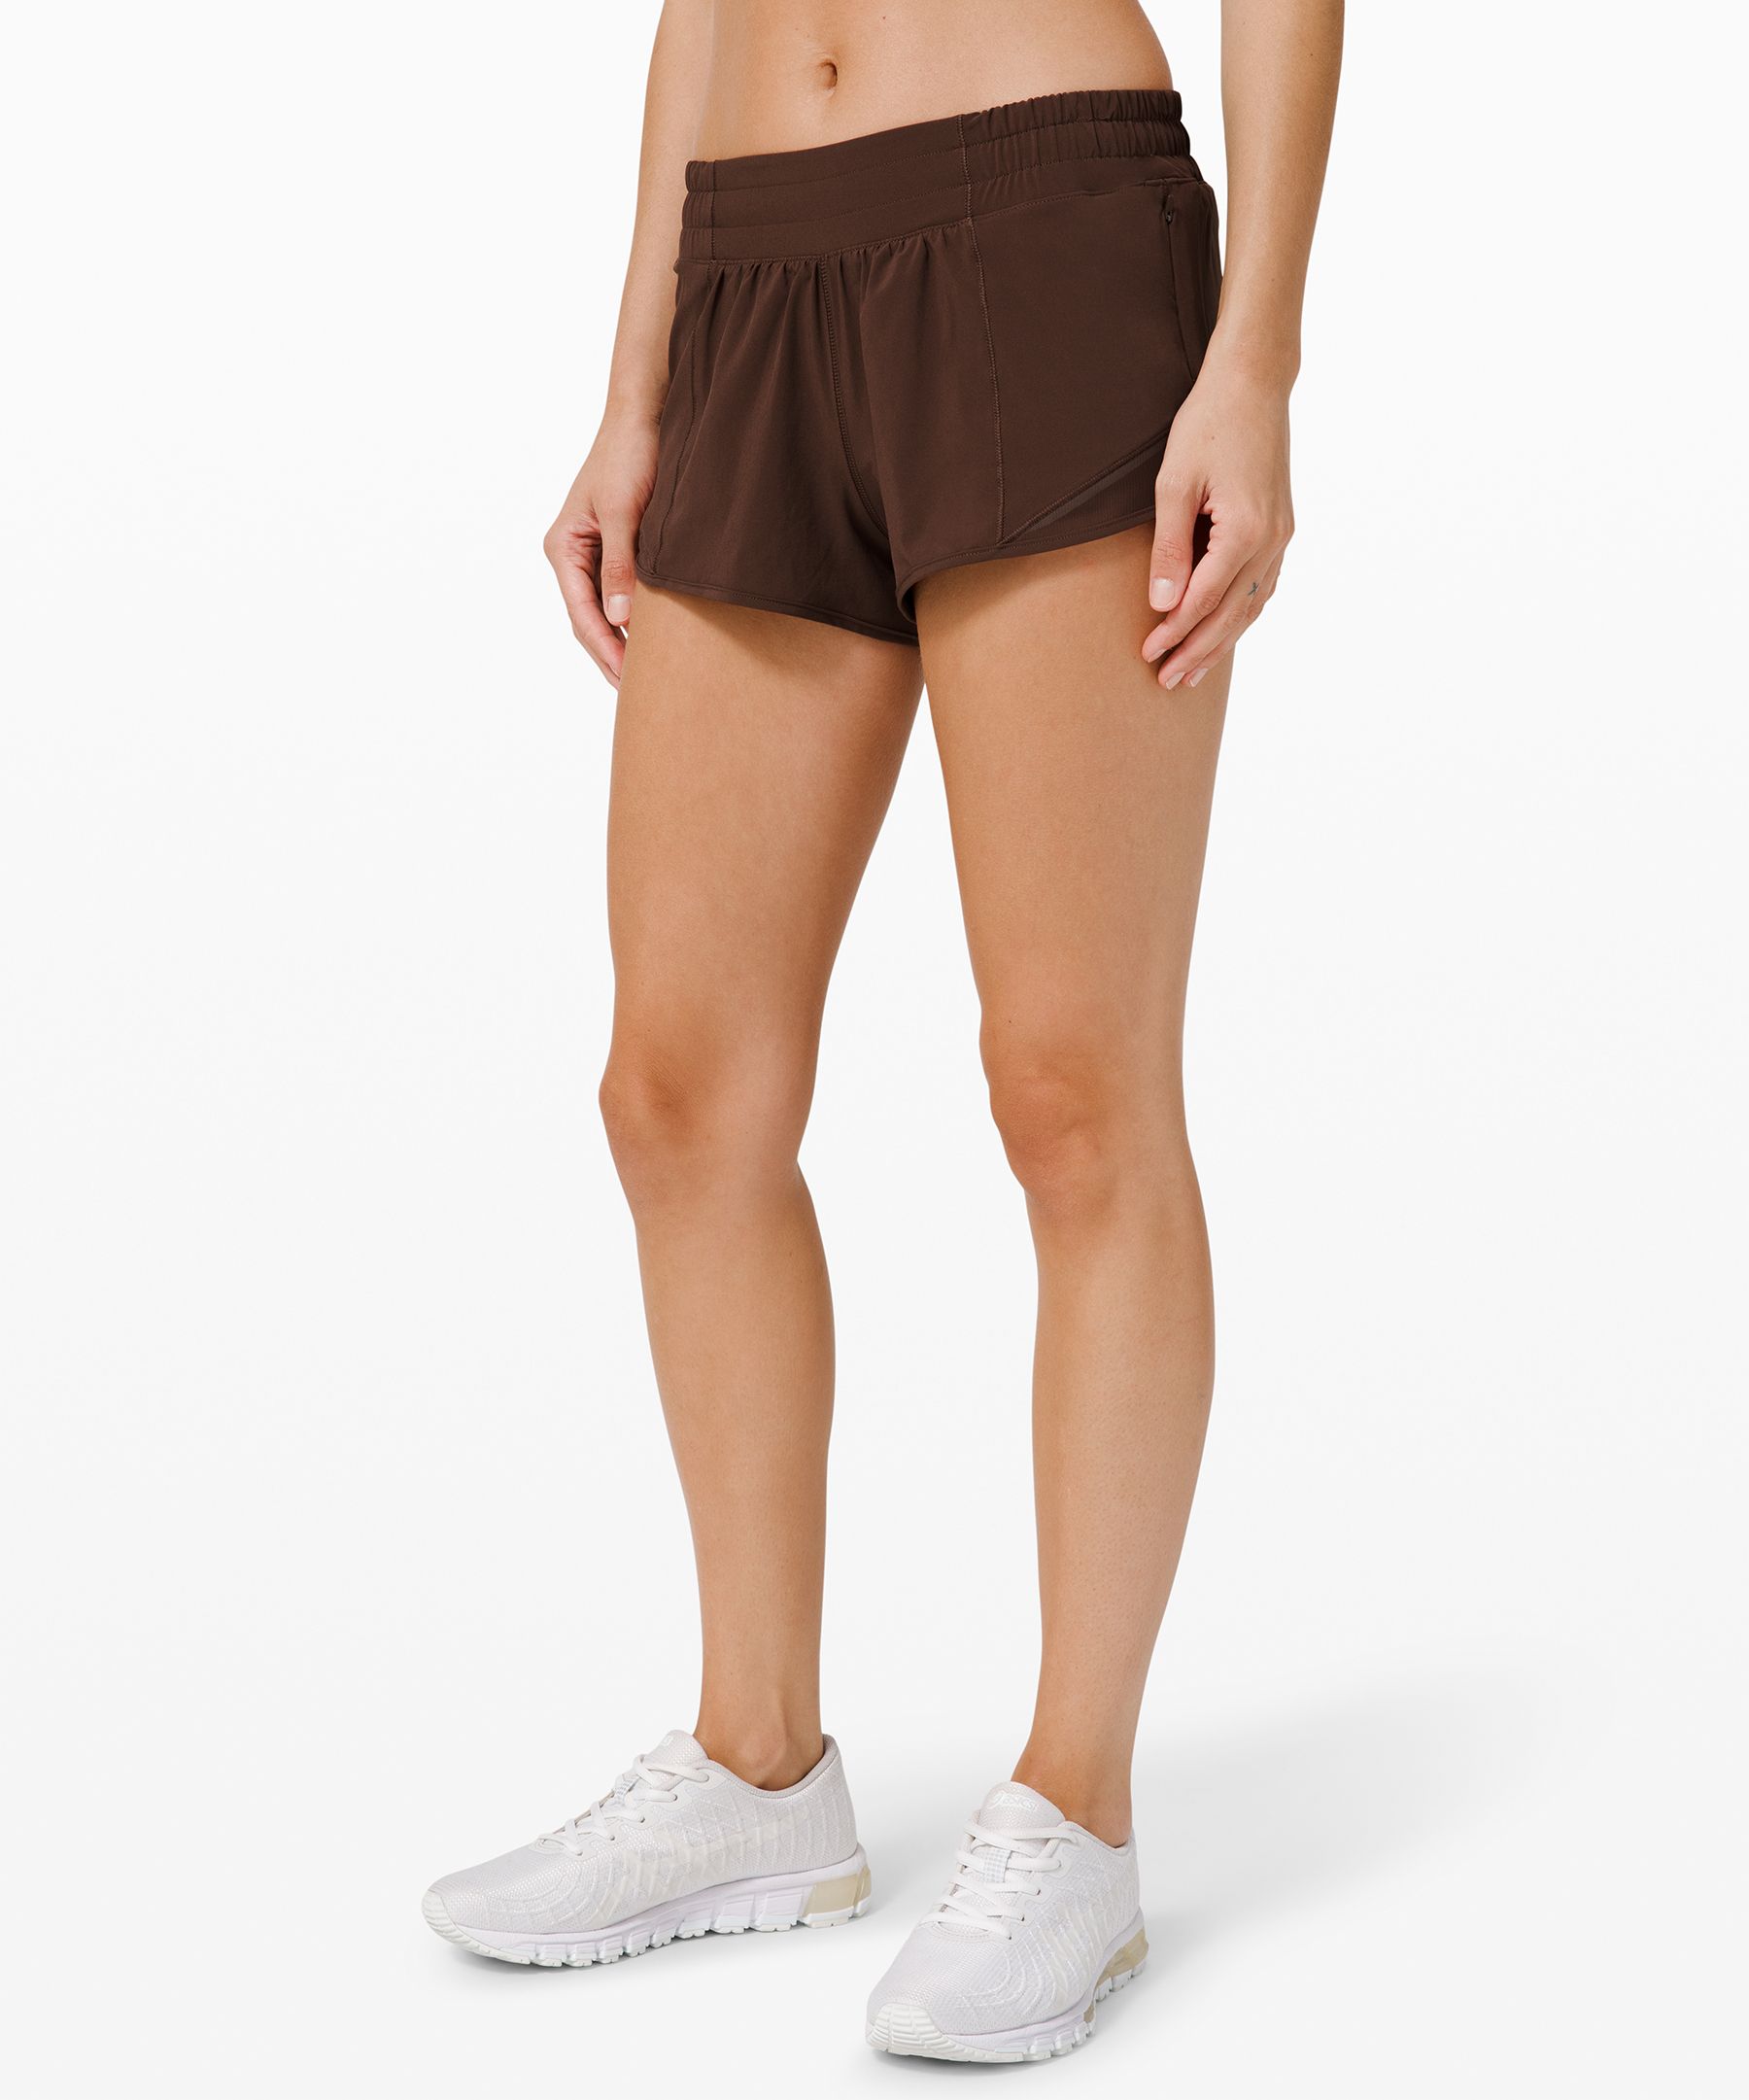 Lululemon Hotty Hot Low-rise Lined Shorts 2.5 In Heritage 365